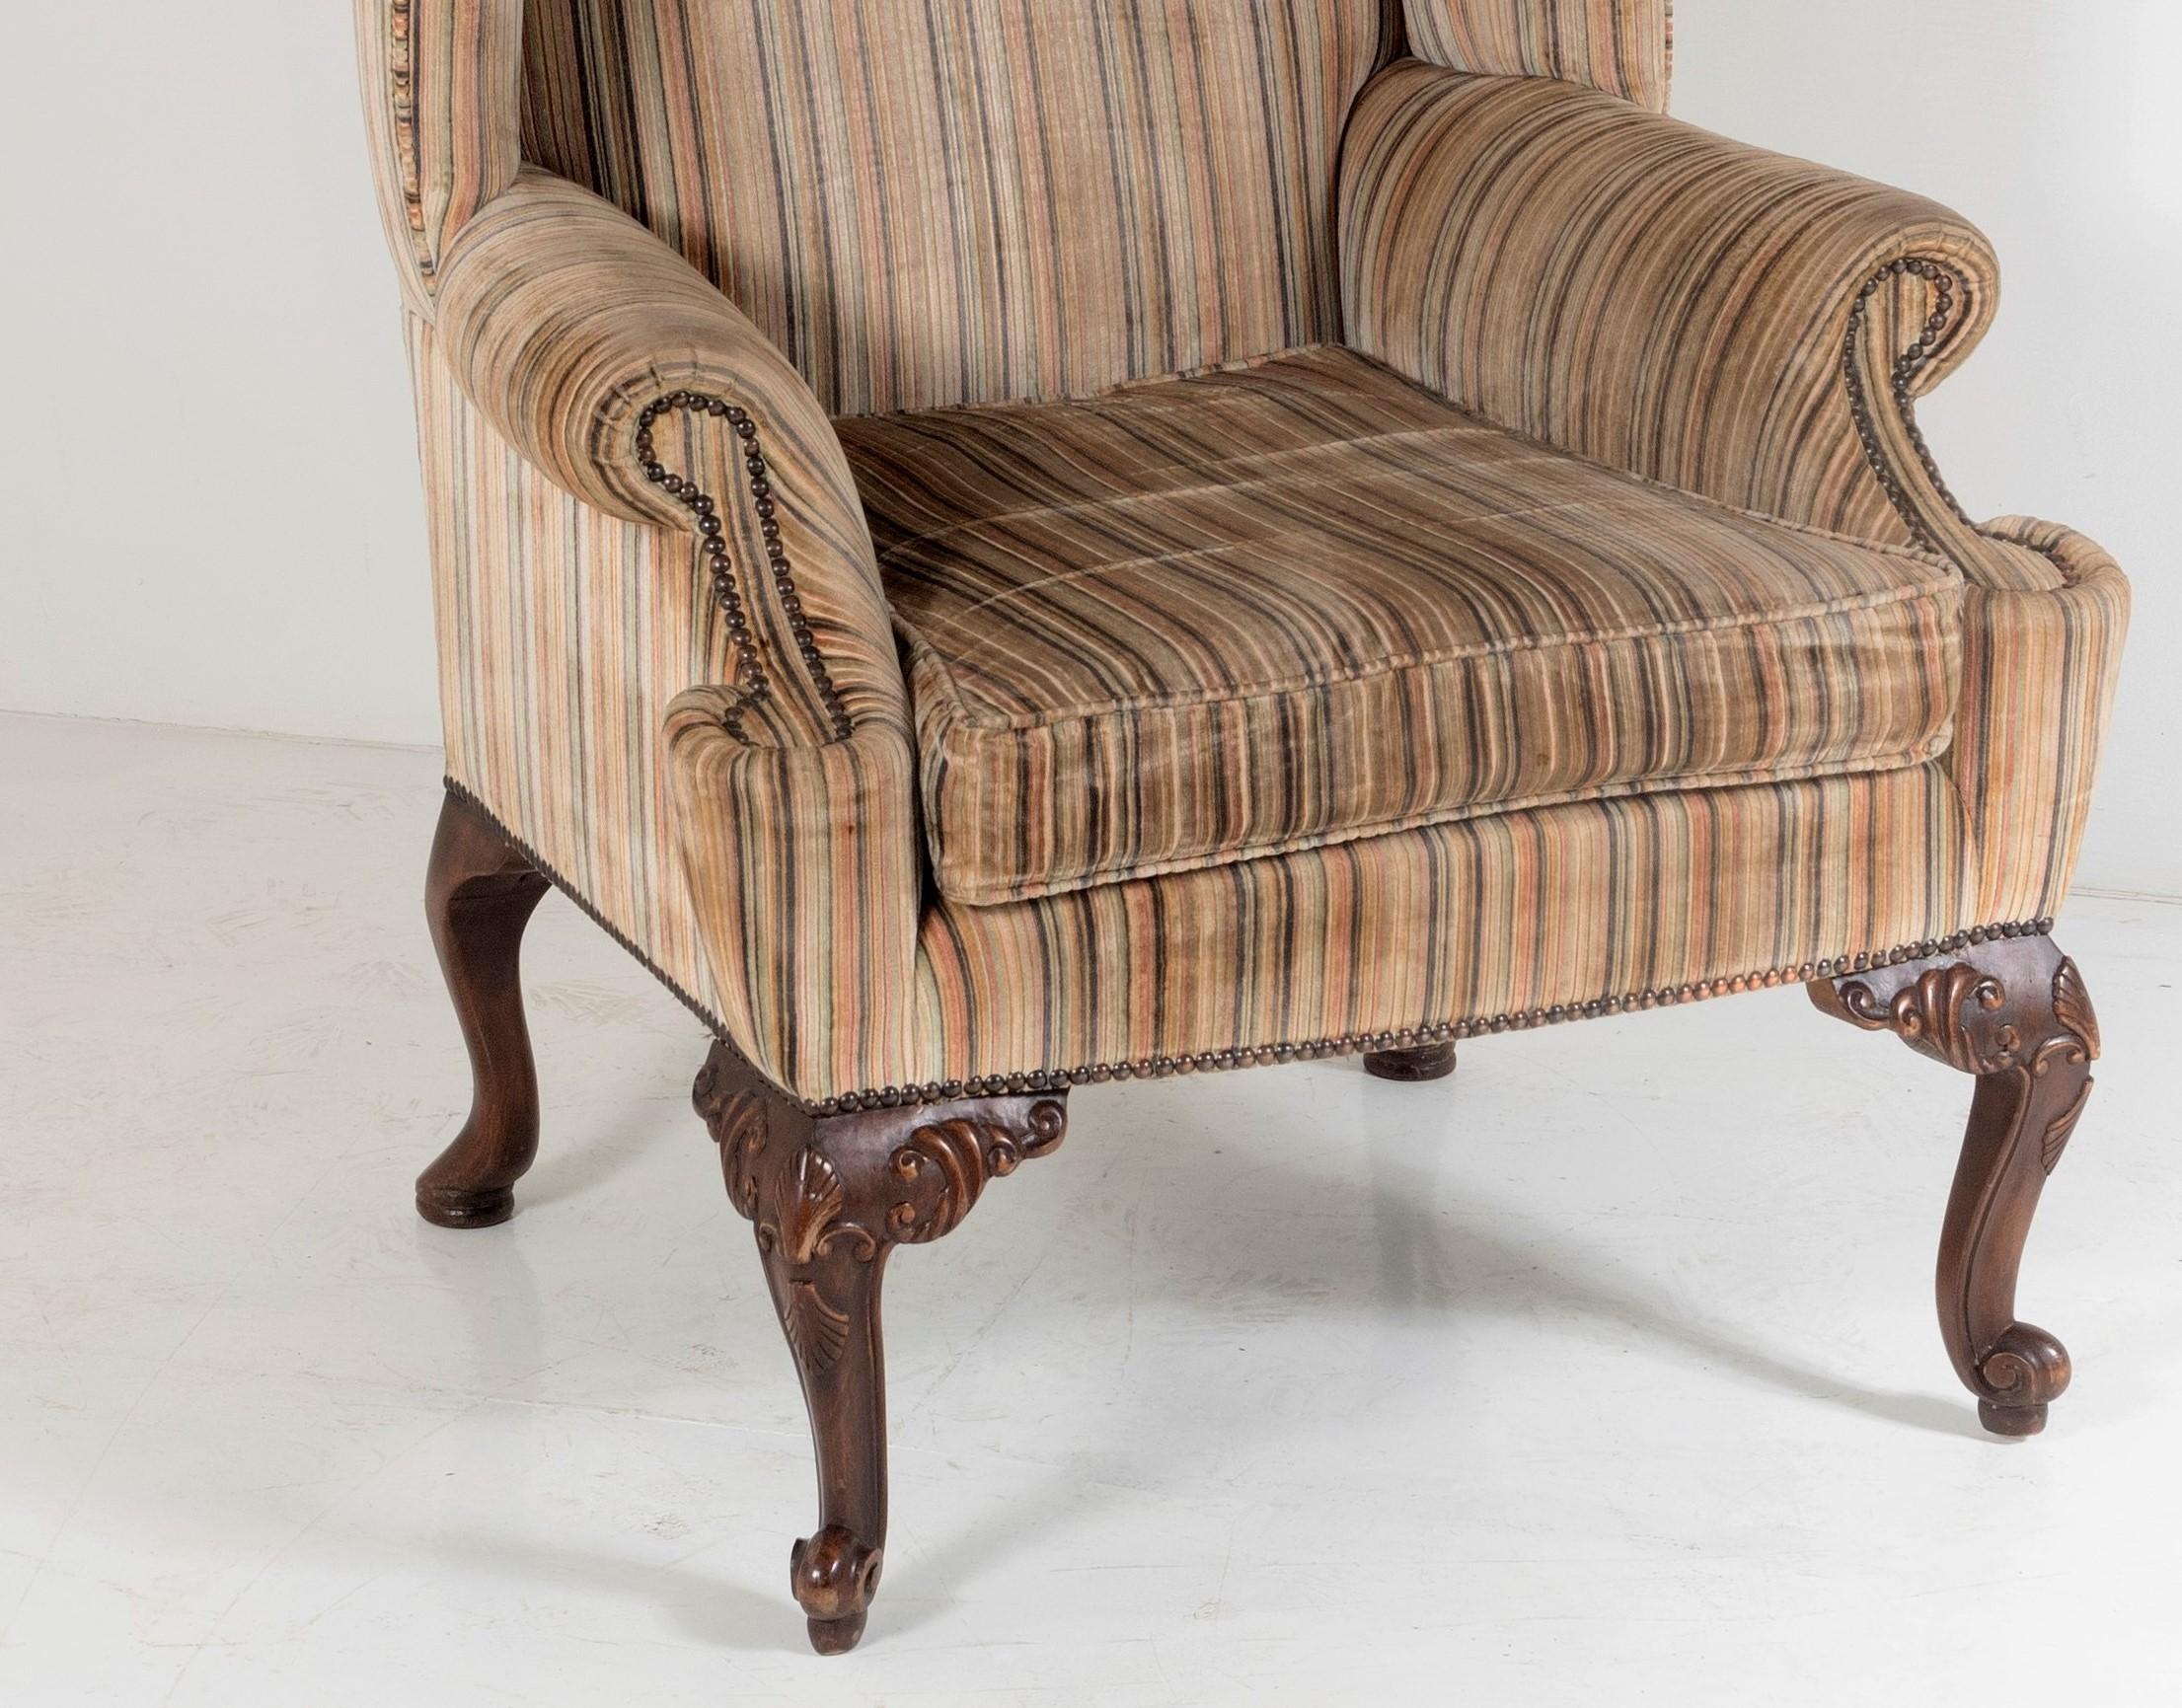 Stylish George III Style Wing Back Armchair in Original Striped Upholstery For Sale 6